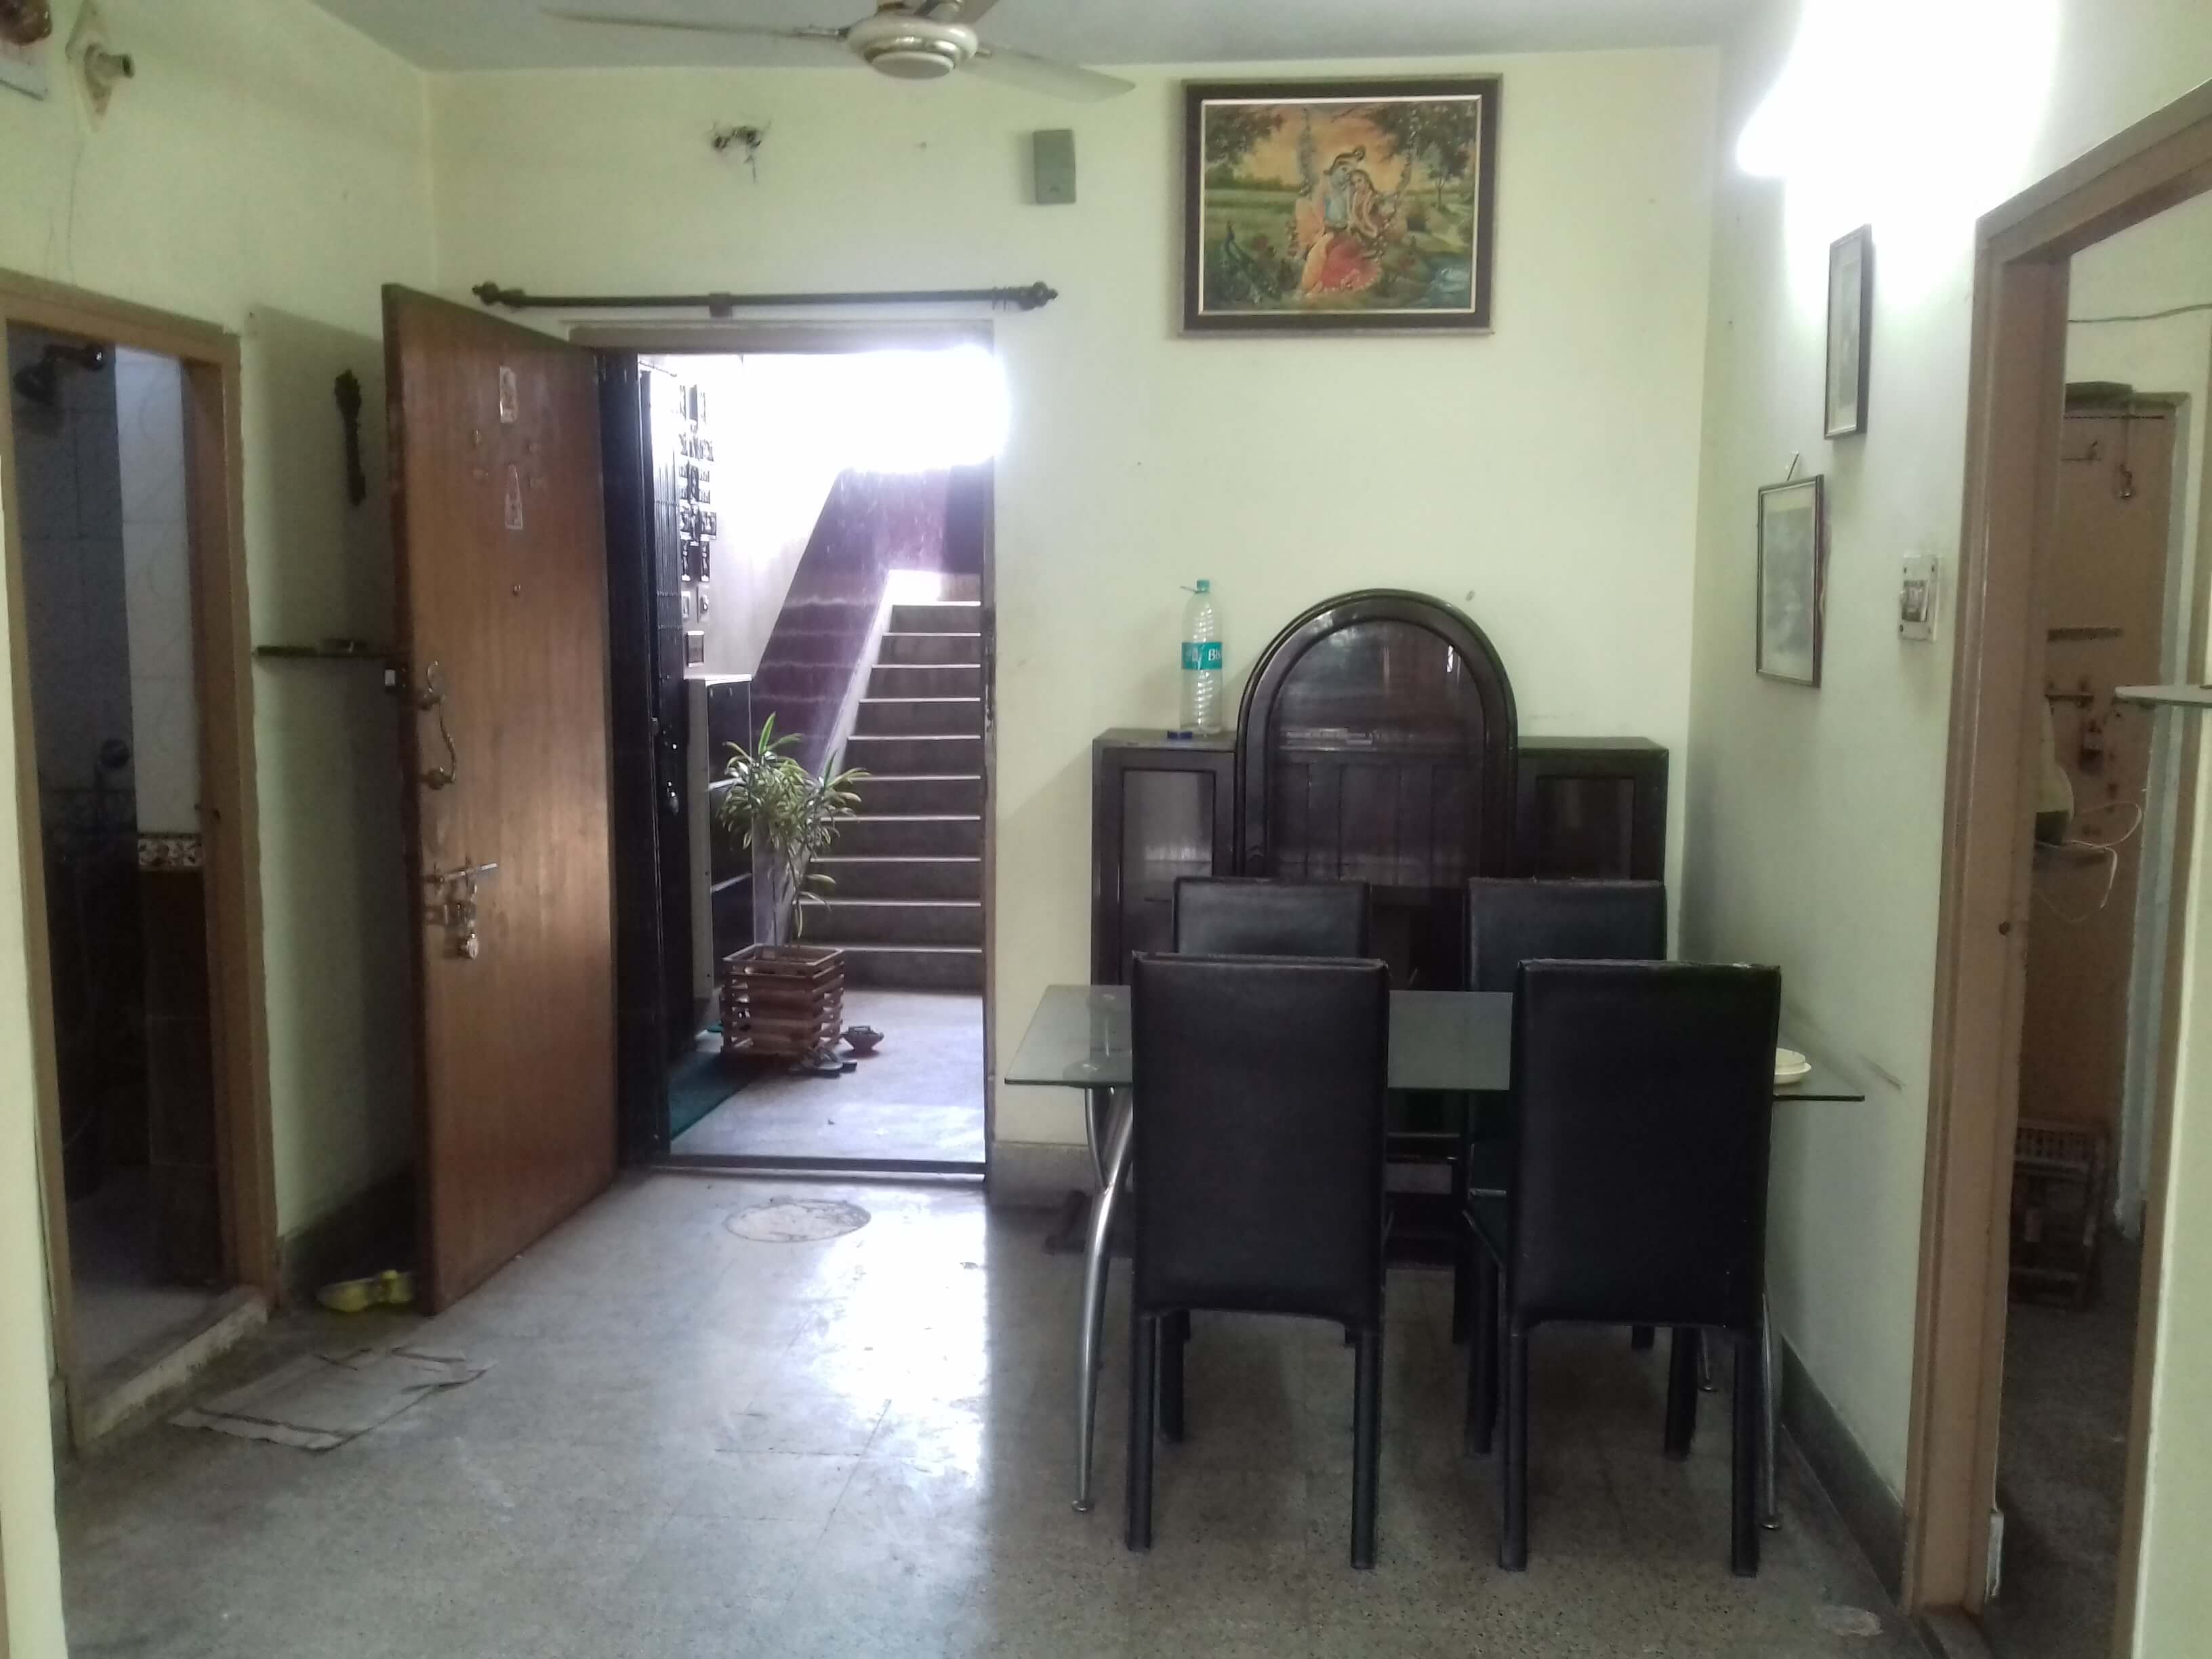 Flat For Rent in Nager Bazar Kolkata (Id: 9418)